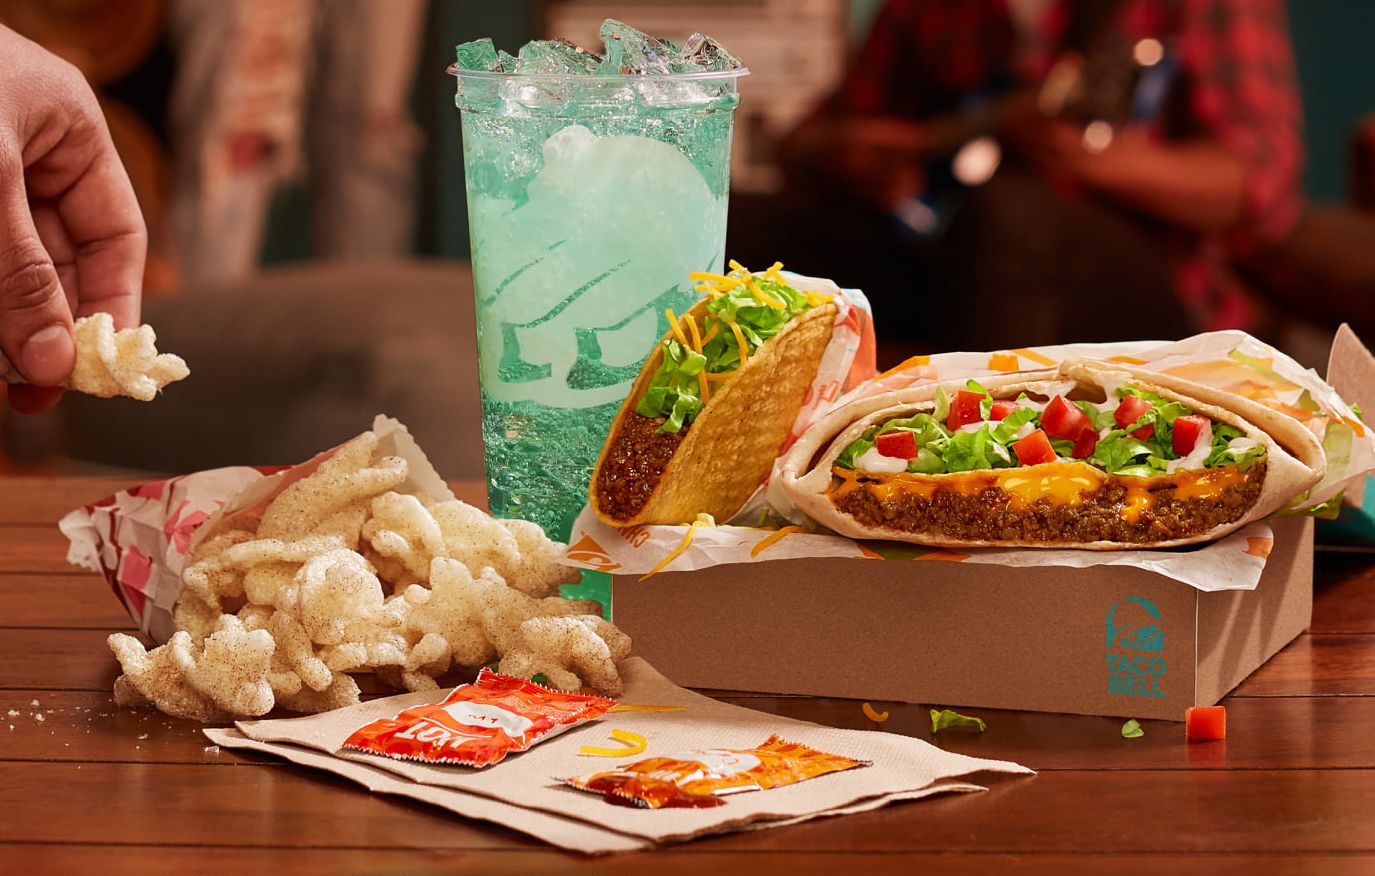 Taco Bell Launches a $5 Build Your Own Cravings Box Available Exclusively with Online Orders